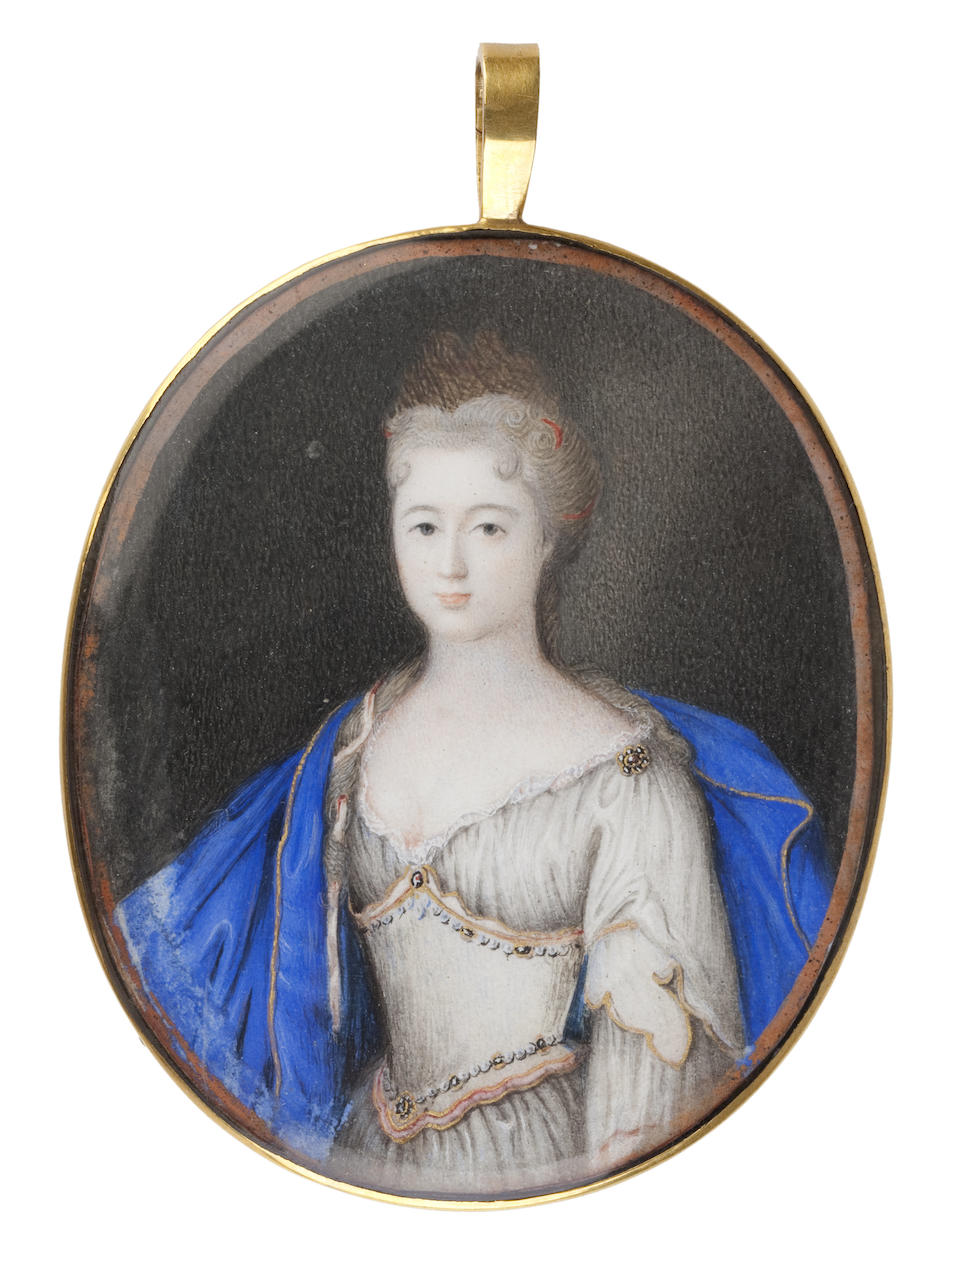 Scottish School, 19th Century Charles Edward Stuart, The Young Pretender 3 x 3 cm. (1 3/16 x 1 3/16 in.) In a jewelled pendant with a fleur-de-lis motif